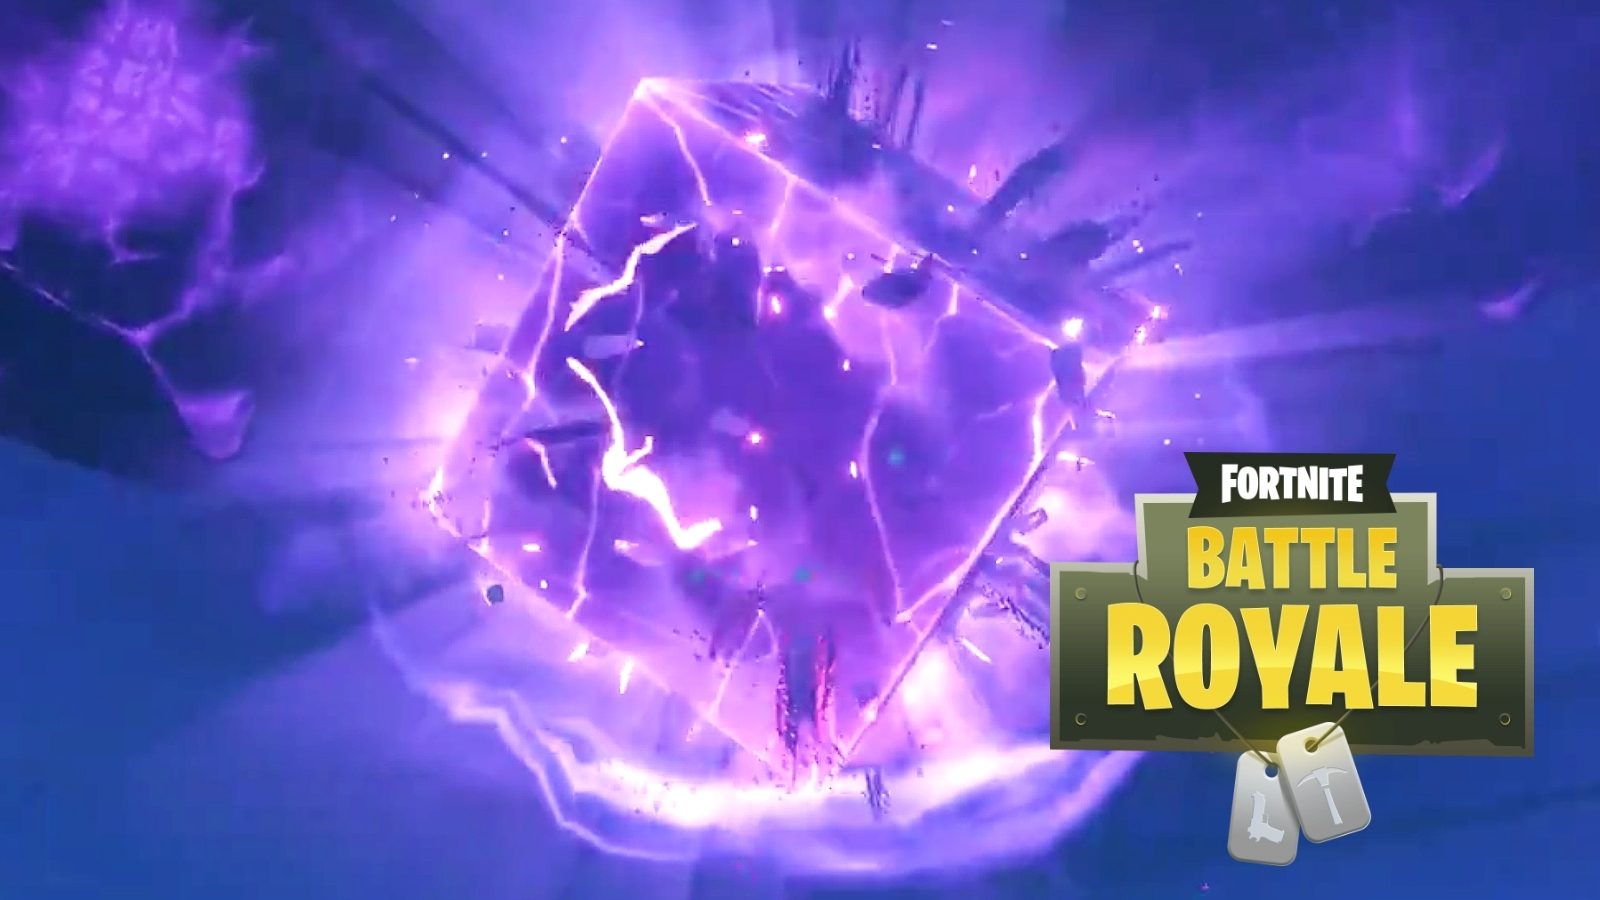 The Purple Cube In Fortnite Has Cracked Open And Is Leaking Into